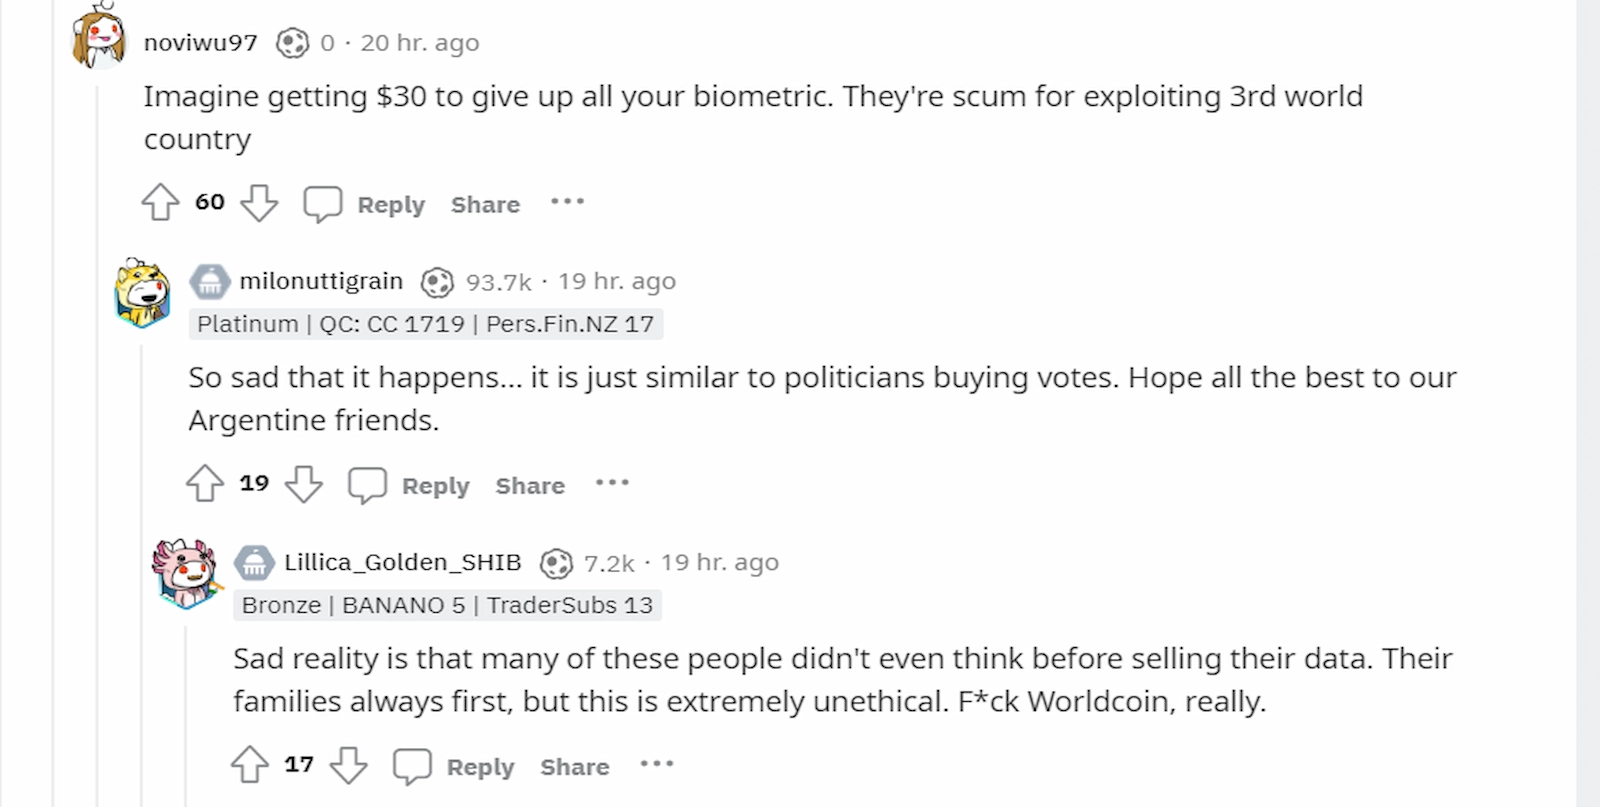 Several Reddit users criticized Worldcoin's actions